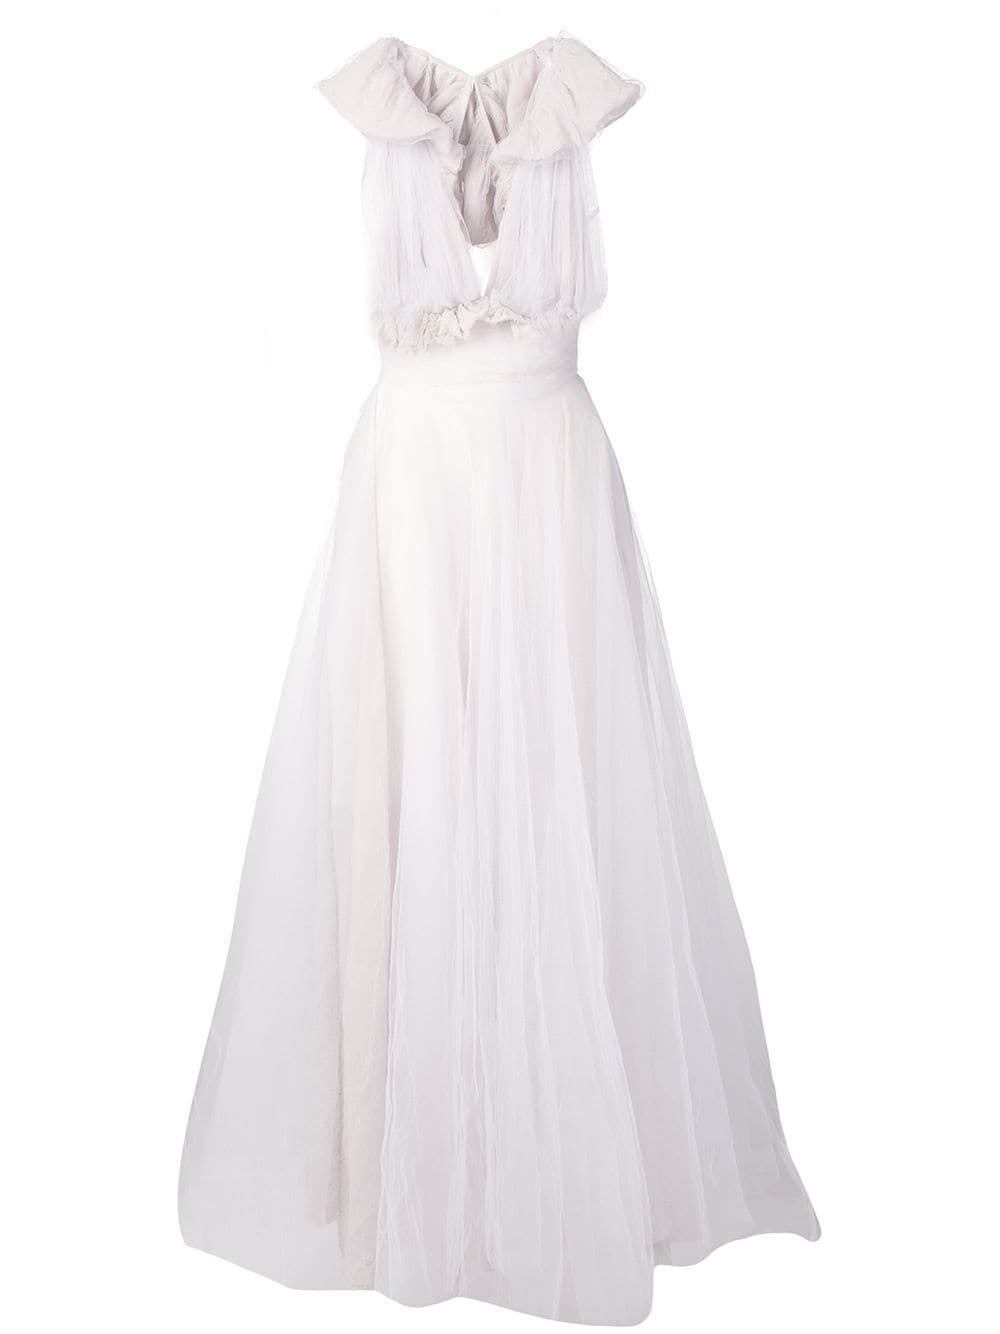 white after wedding party dress